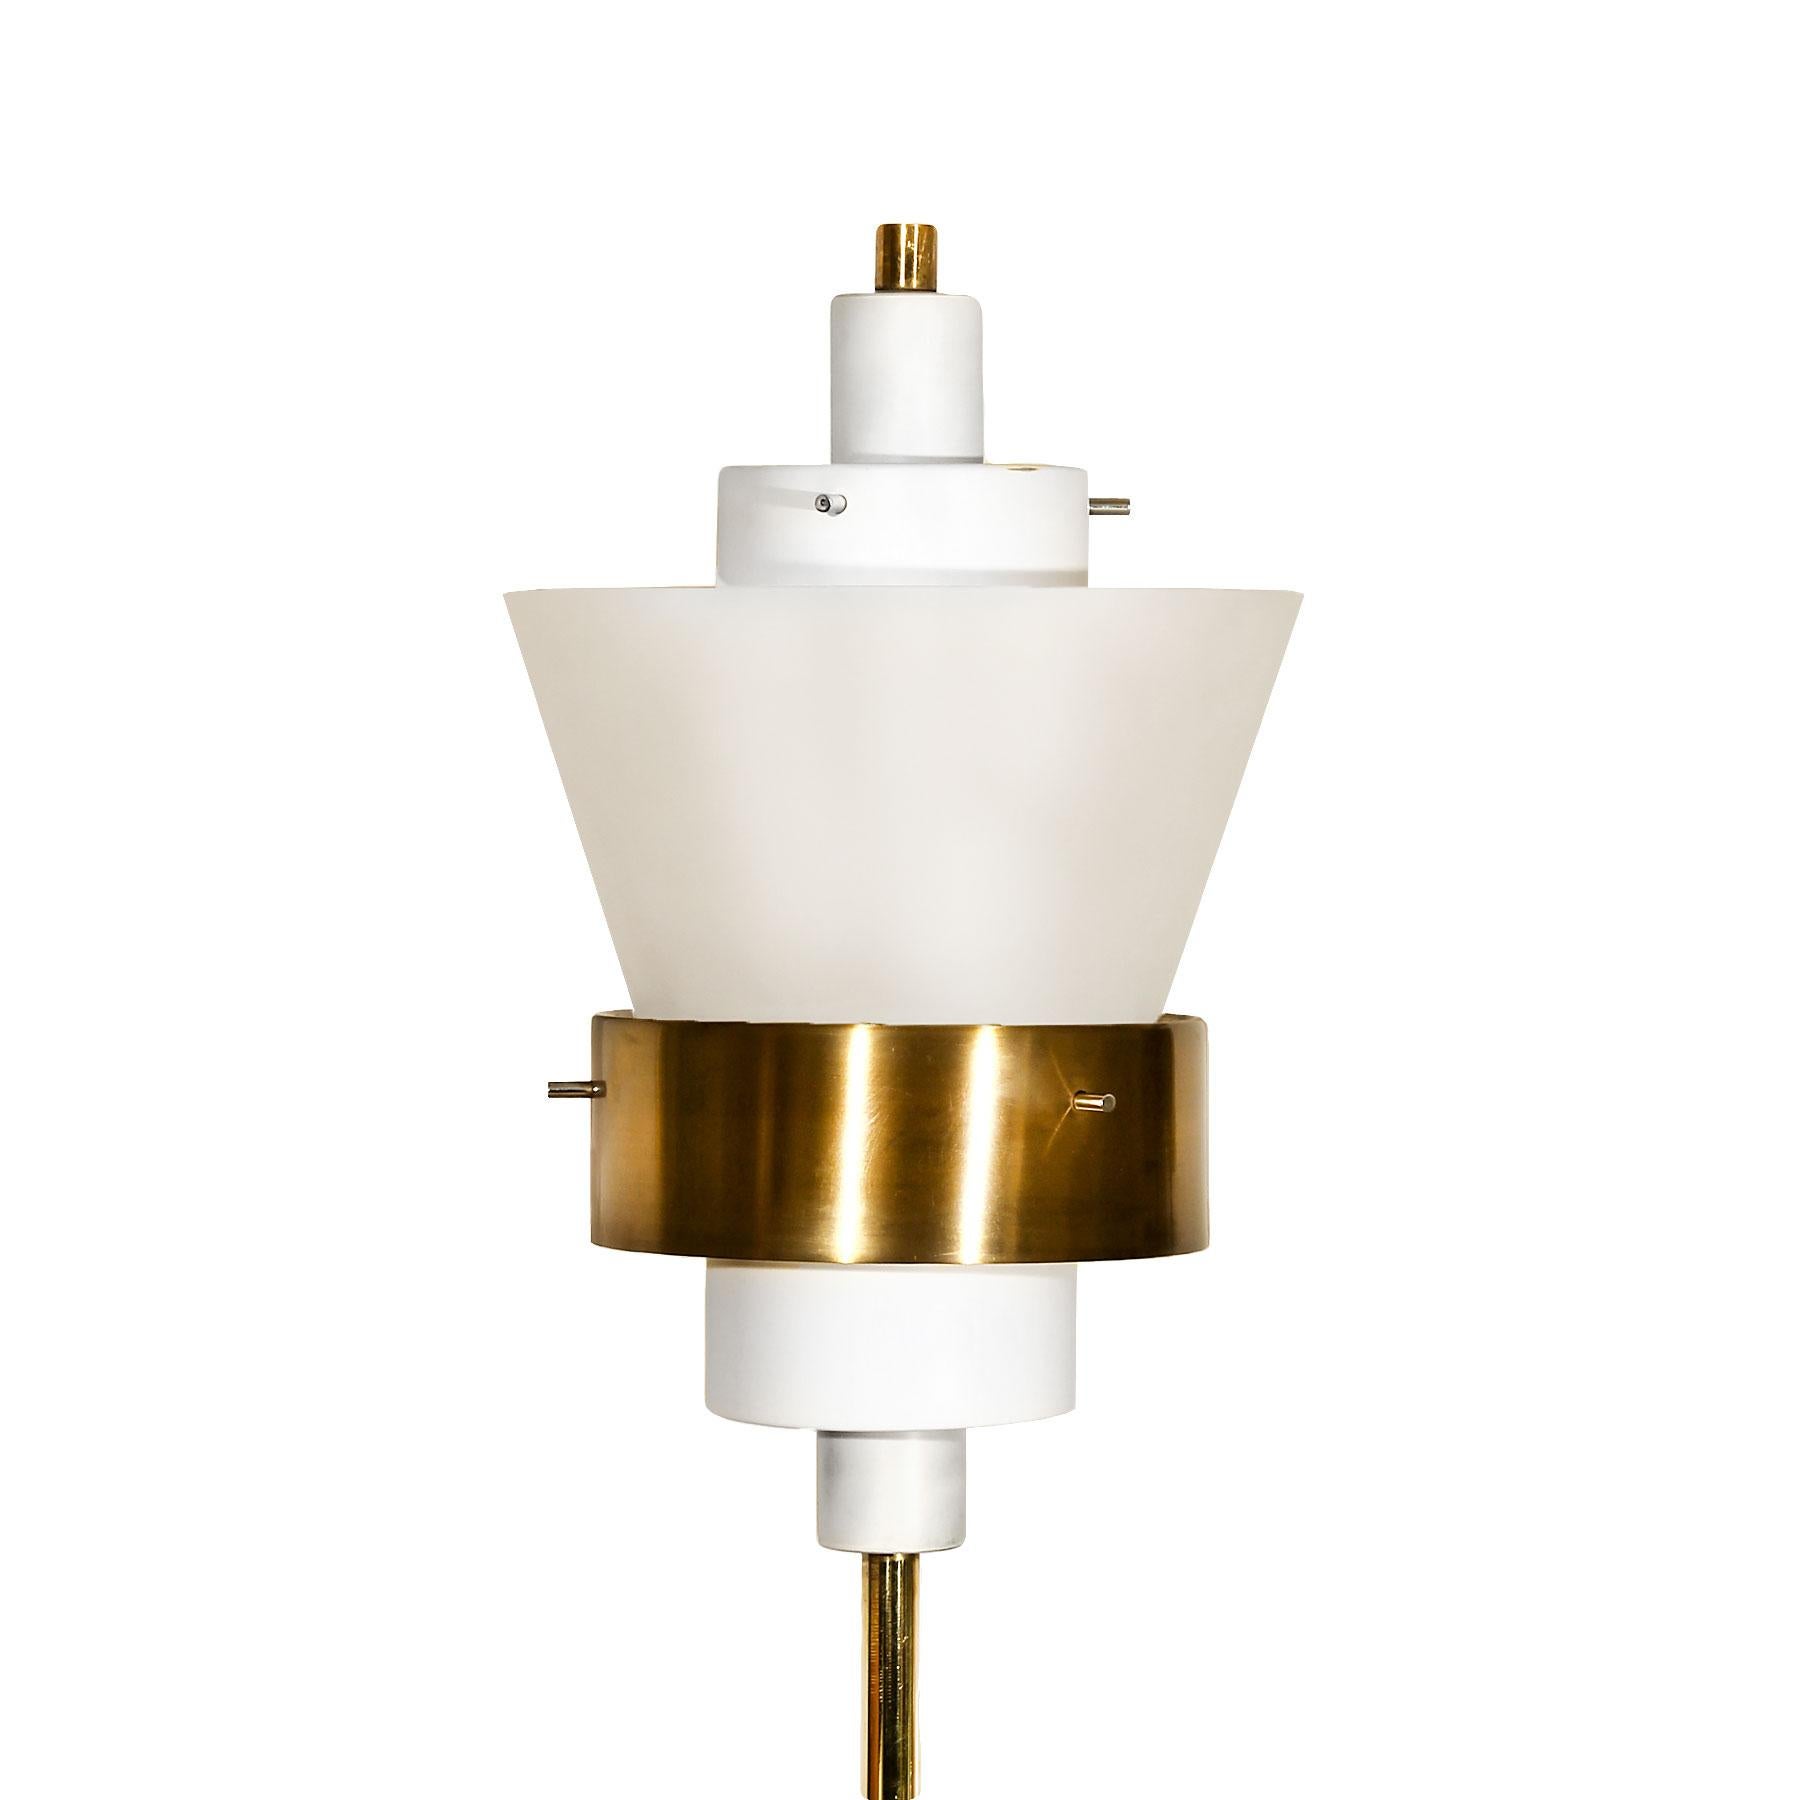 Standing lamp, solid brass, lacquered sheet metal and Lucite lampshade, completely from origin.
Maker: Stilnovo (label), 
Italy, circa 1950.